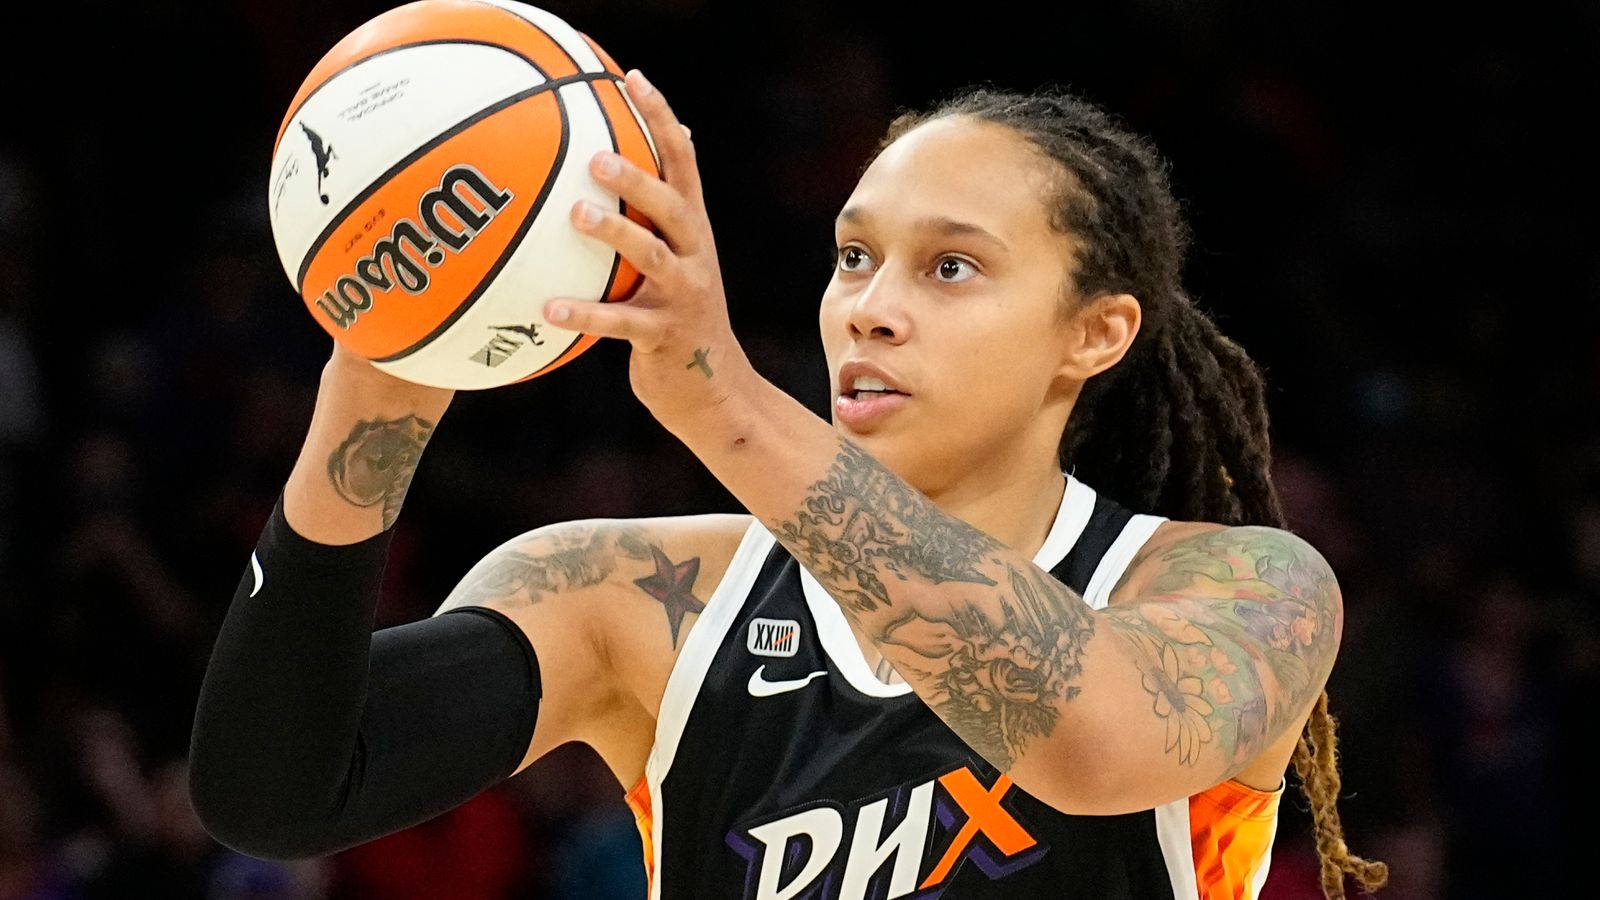 WNBA star Brittney Griner goes on trial in Russia on drugs charges four months after arrest | Basketball News